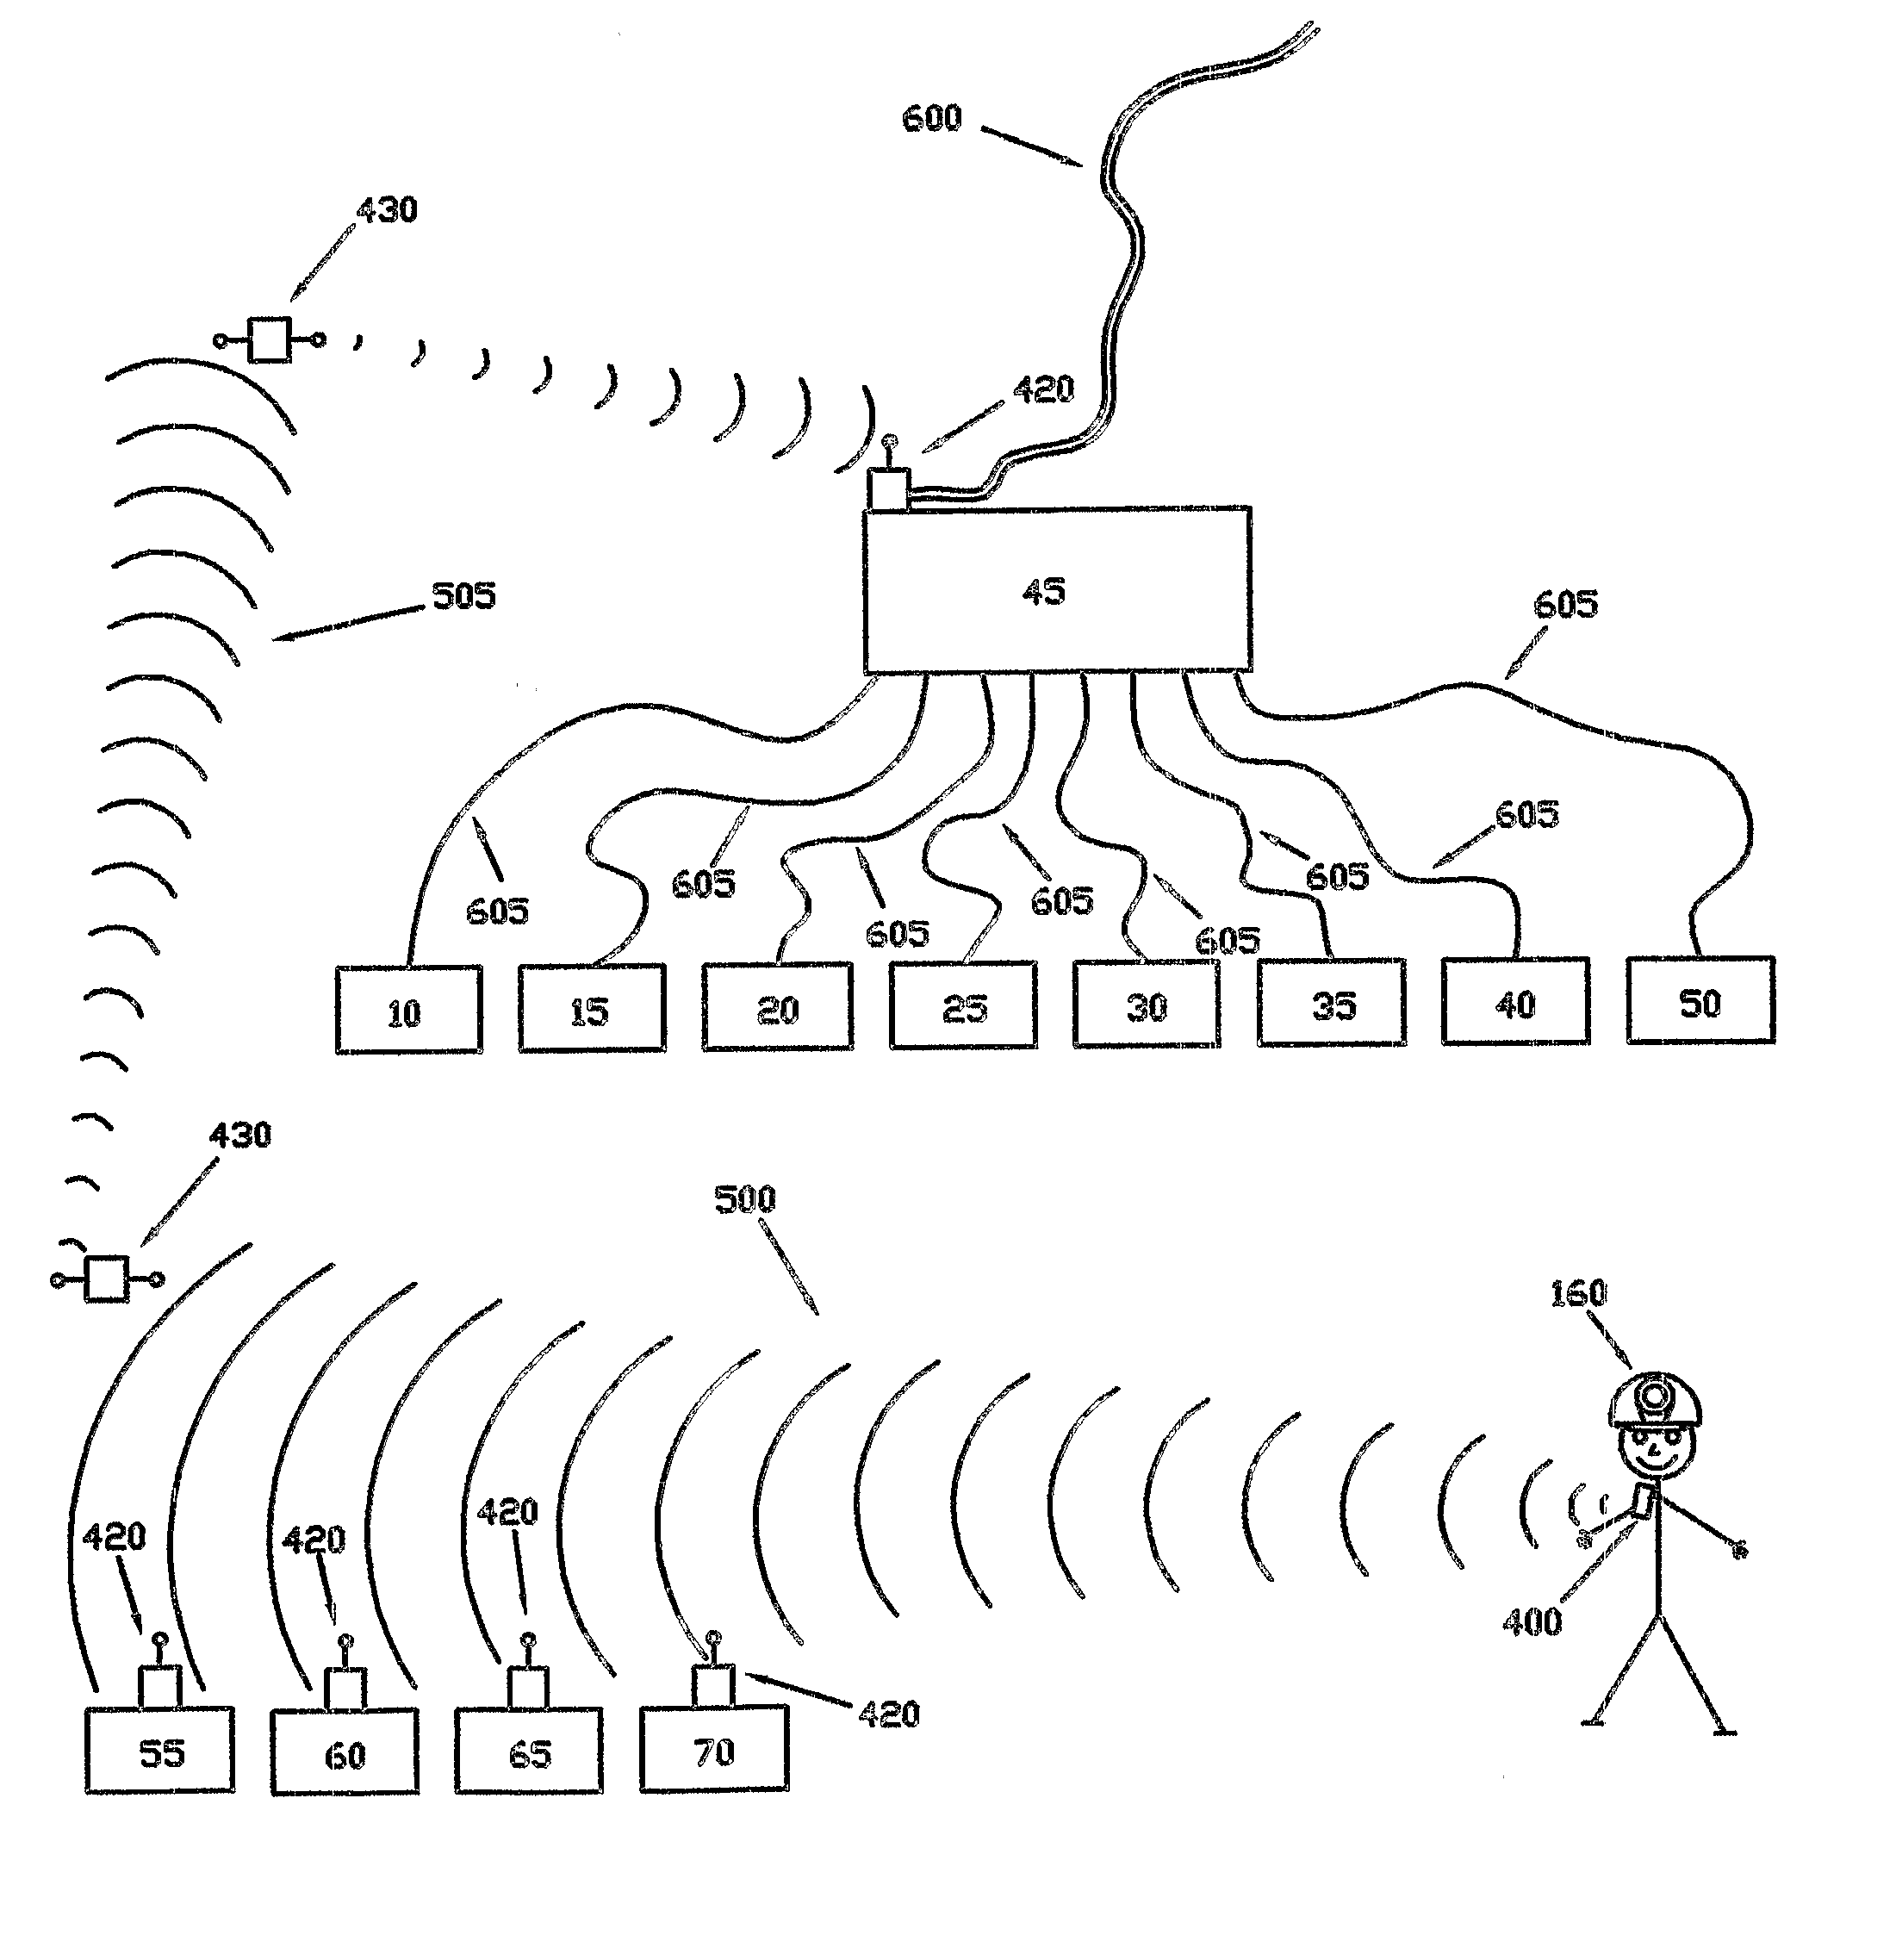 Method and Arrangement for Stopping Powered Equipment in an Emergency Situation